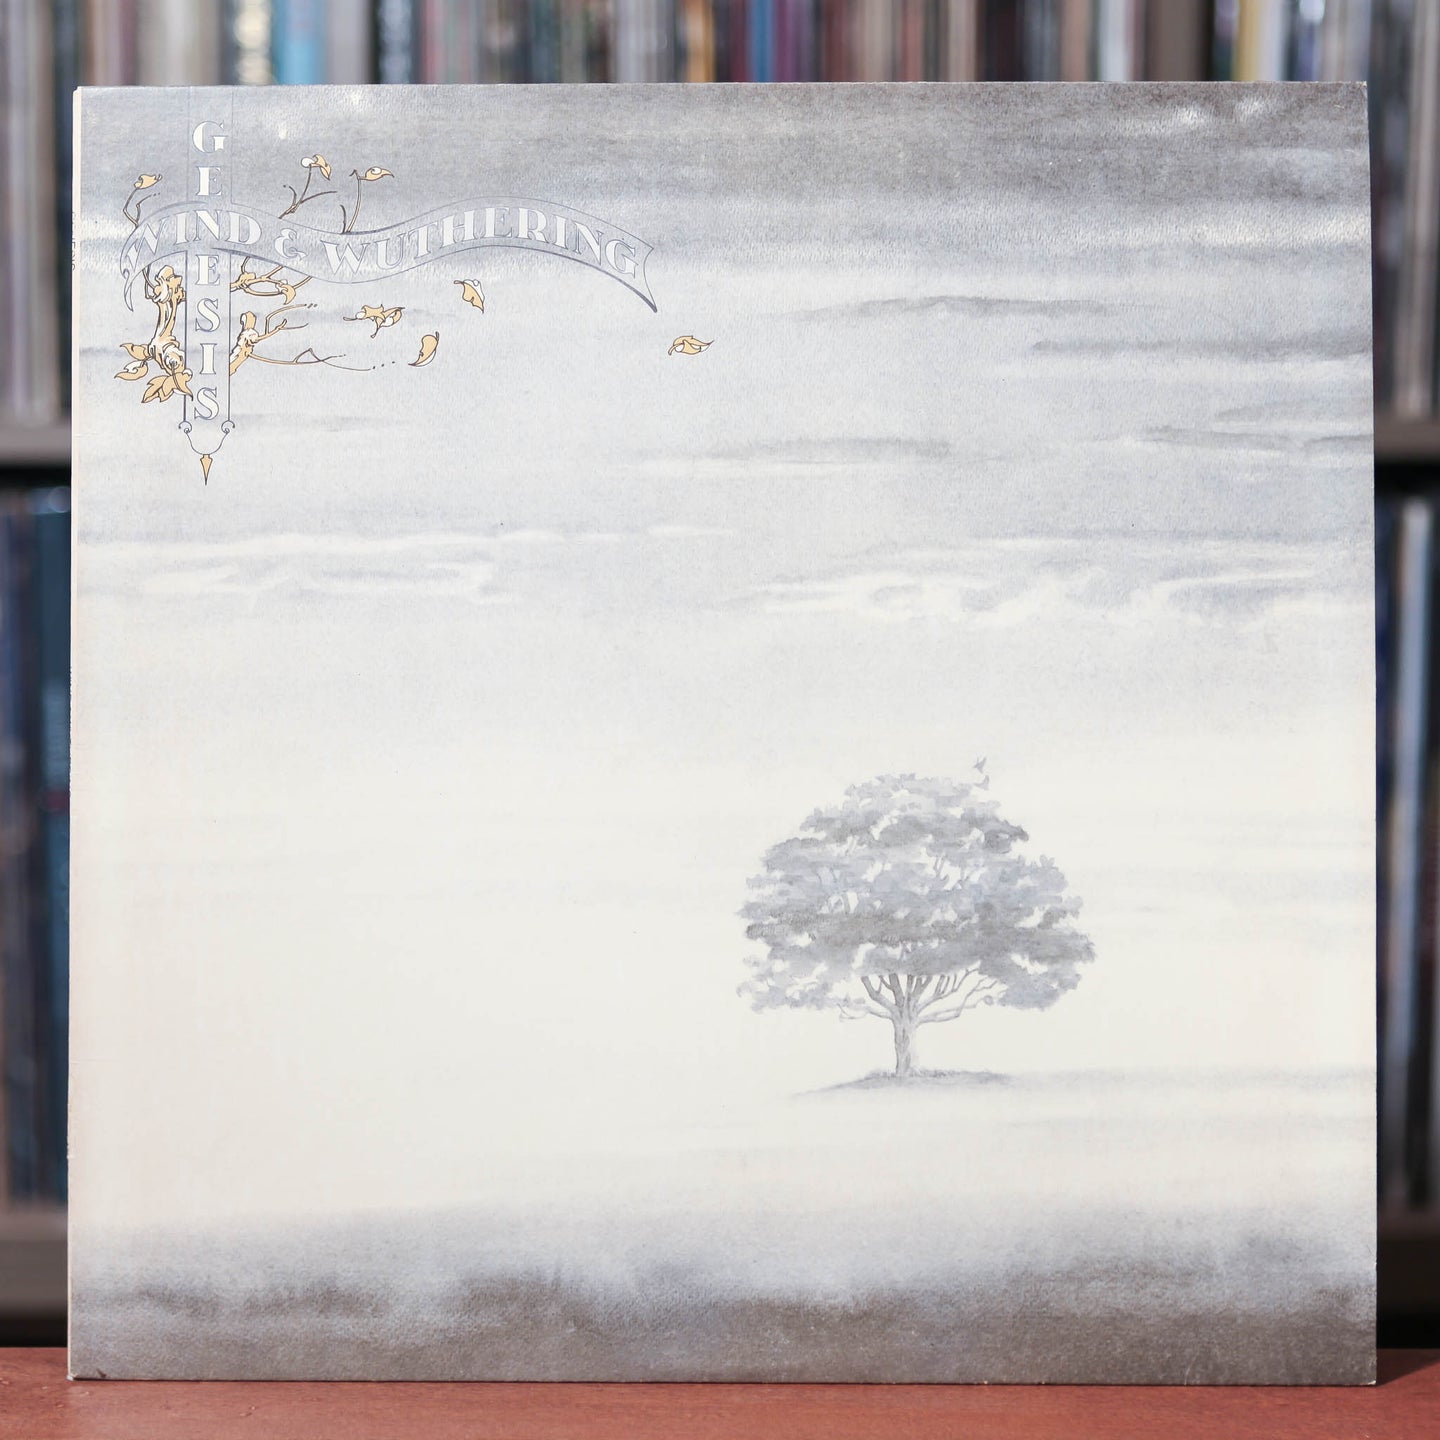 GENESIS - WIND & WUTHERING - ATCO RECORDS LP SD 36-144 海外 即決-